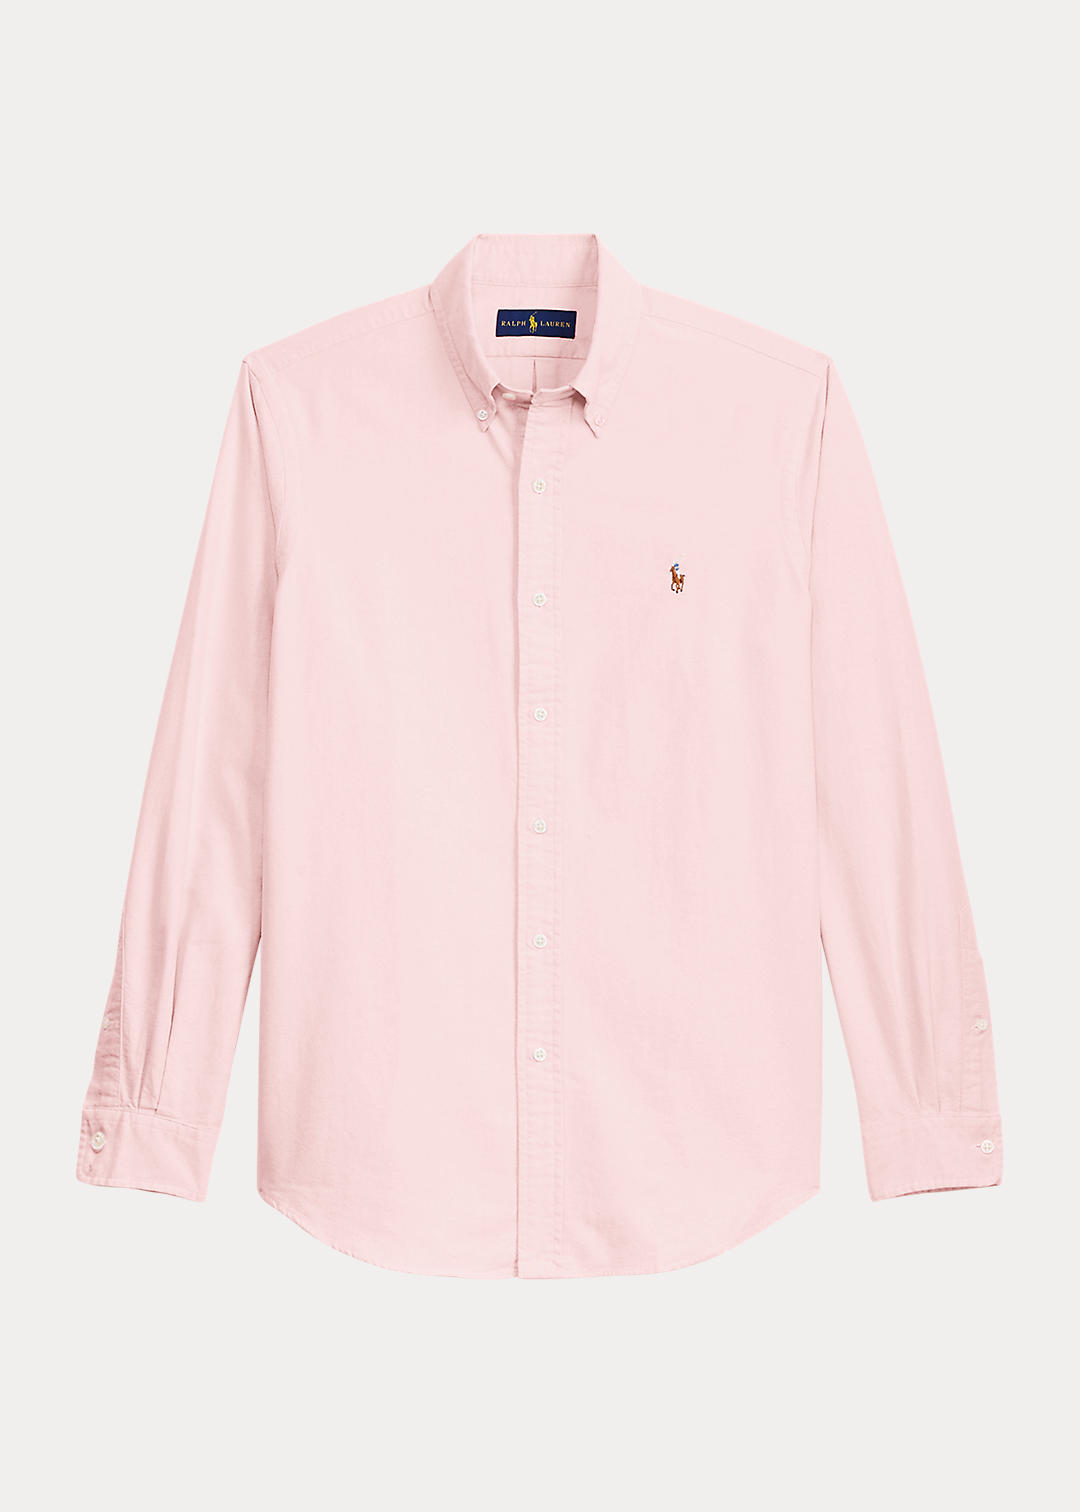 Polo Ralph Lauren The Iconic Oxford Shirt 2